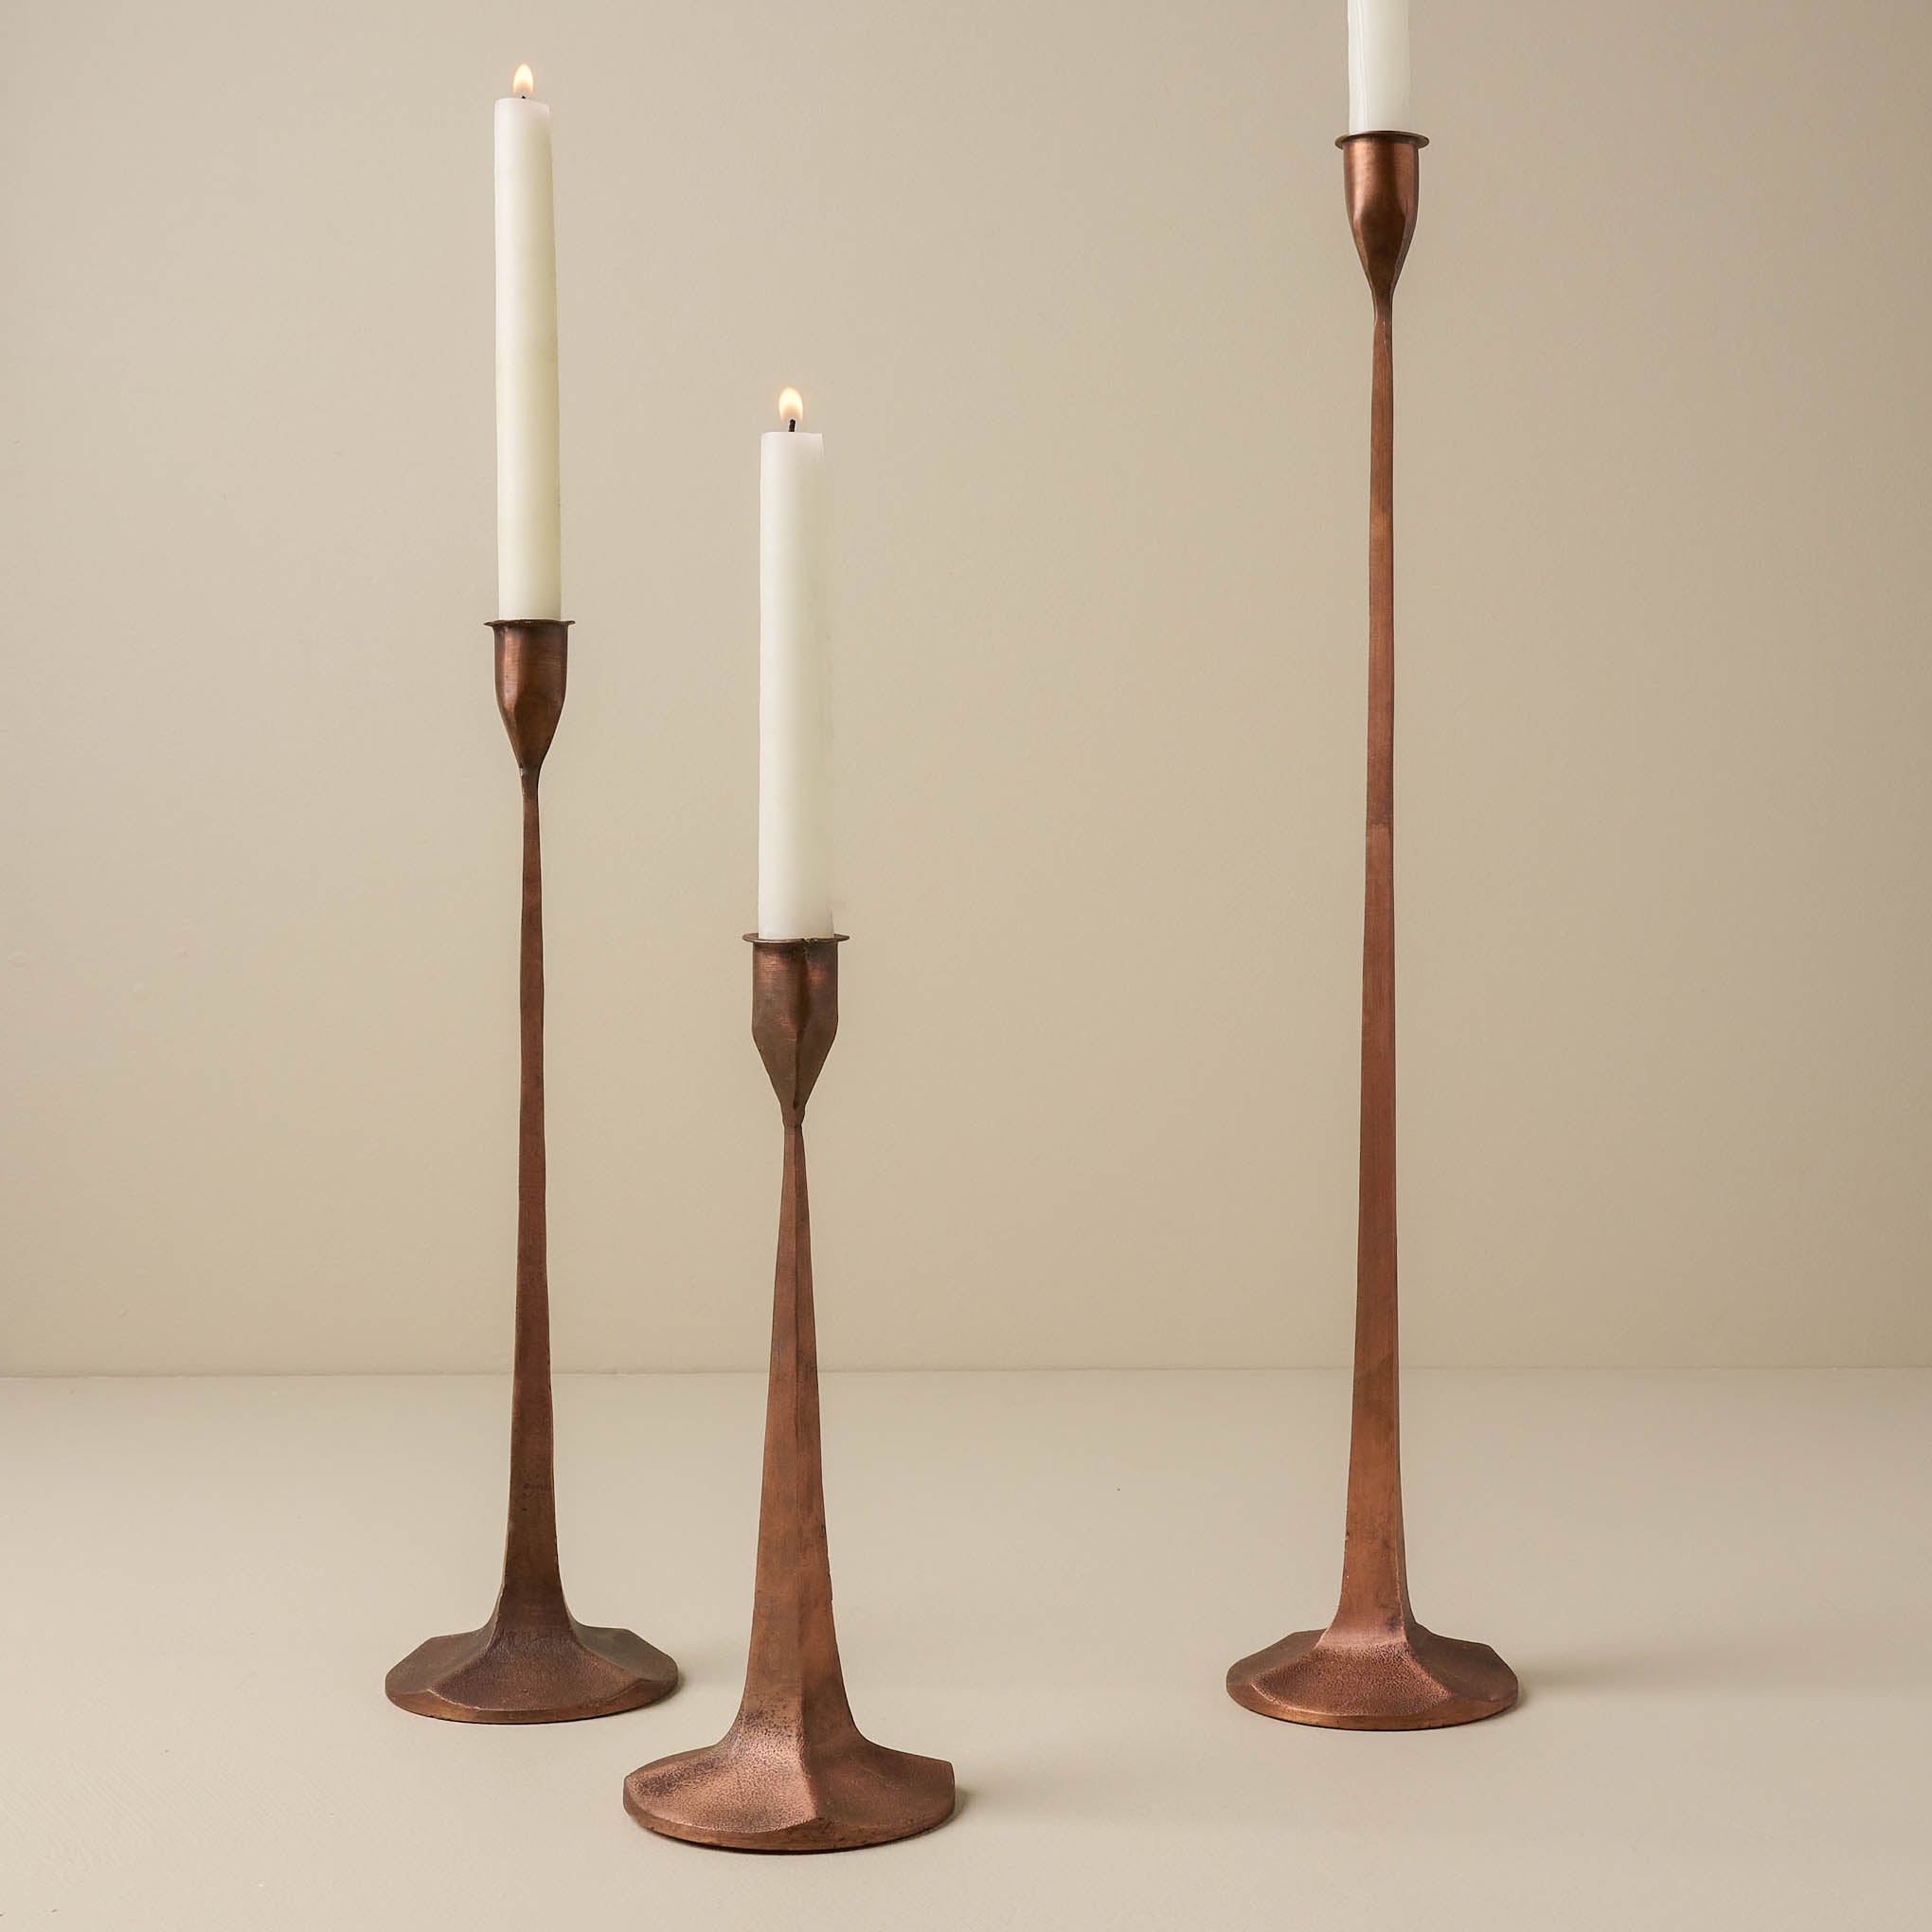  Candlestick Holders - Candlestick Holders